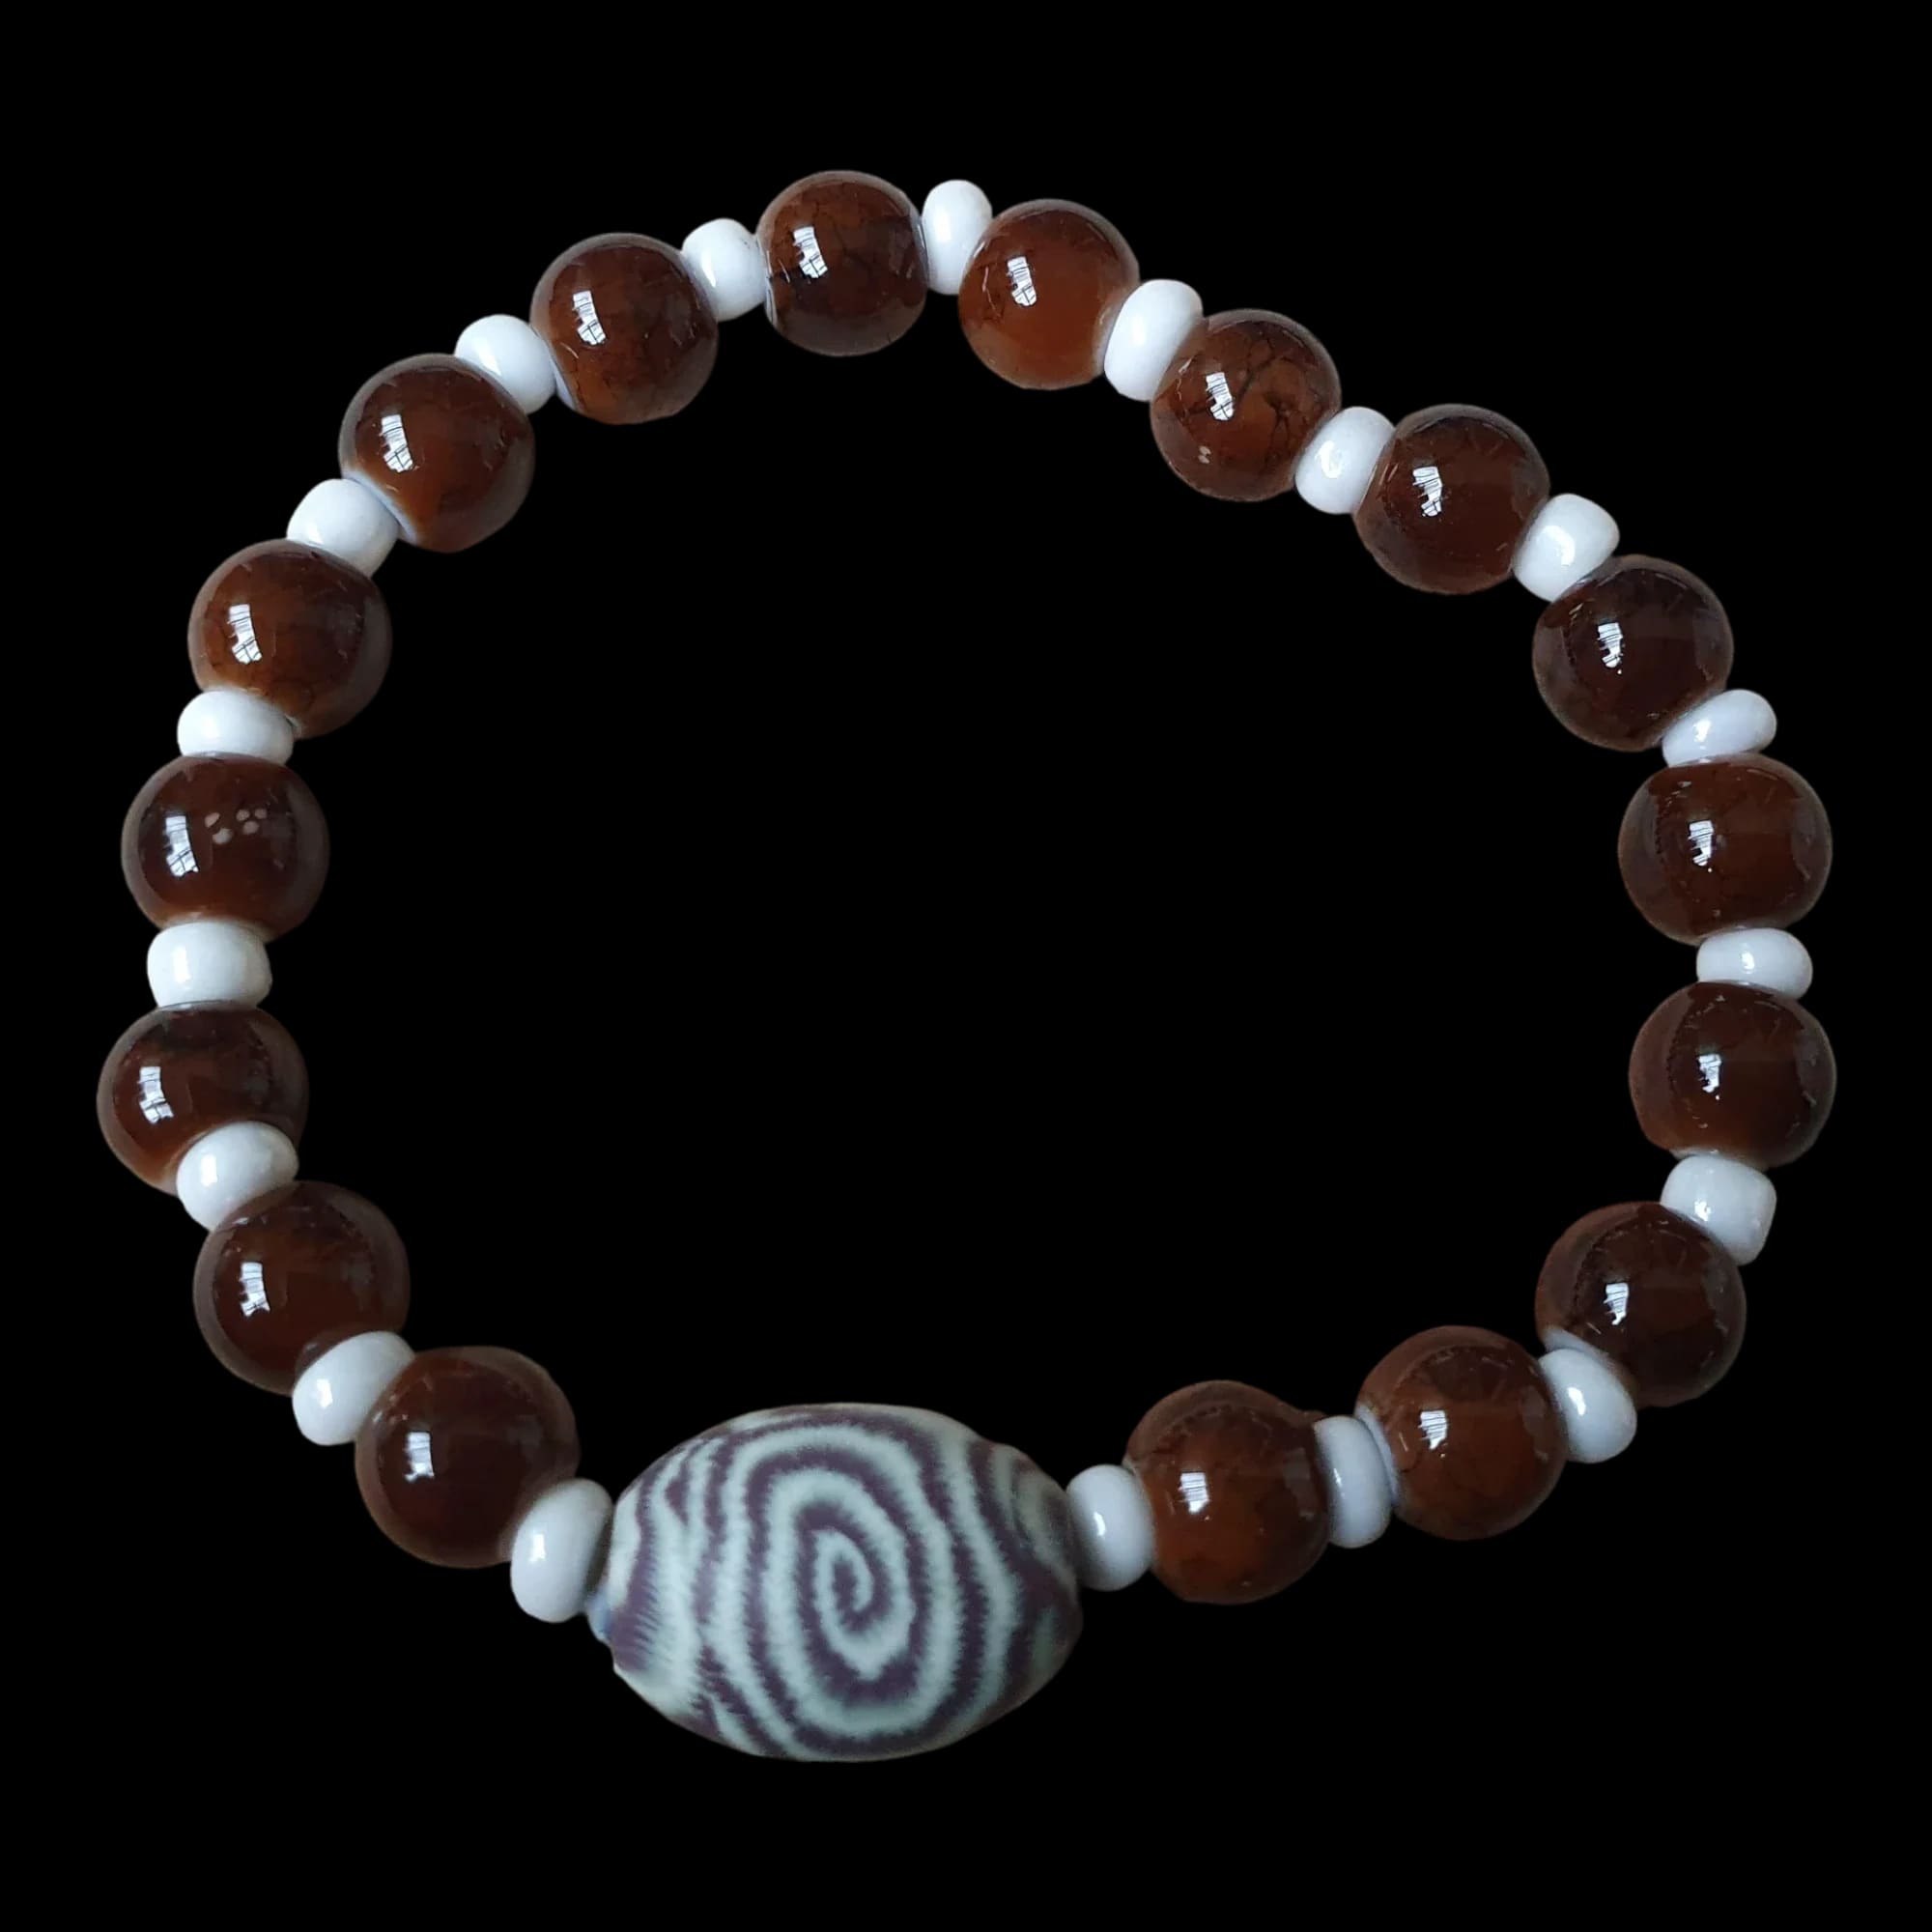 Unique Handmade Crafted Beaded Stretch Bracelet Gift